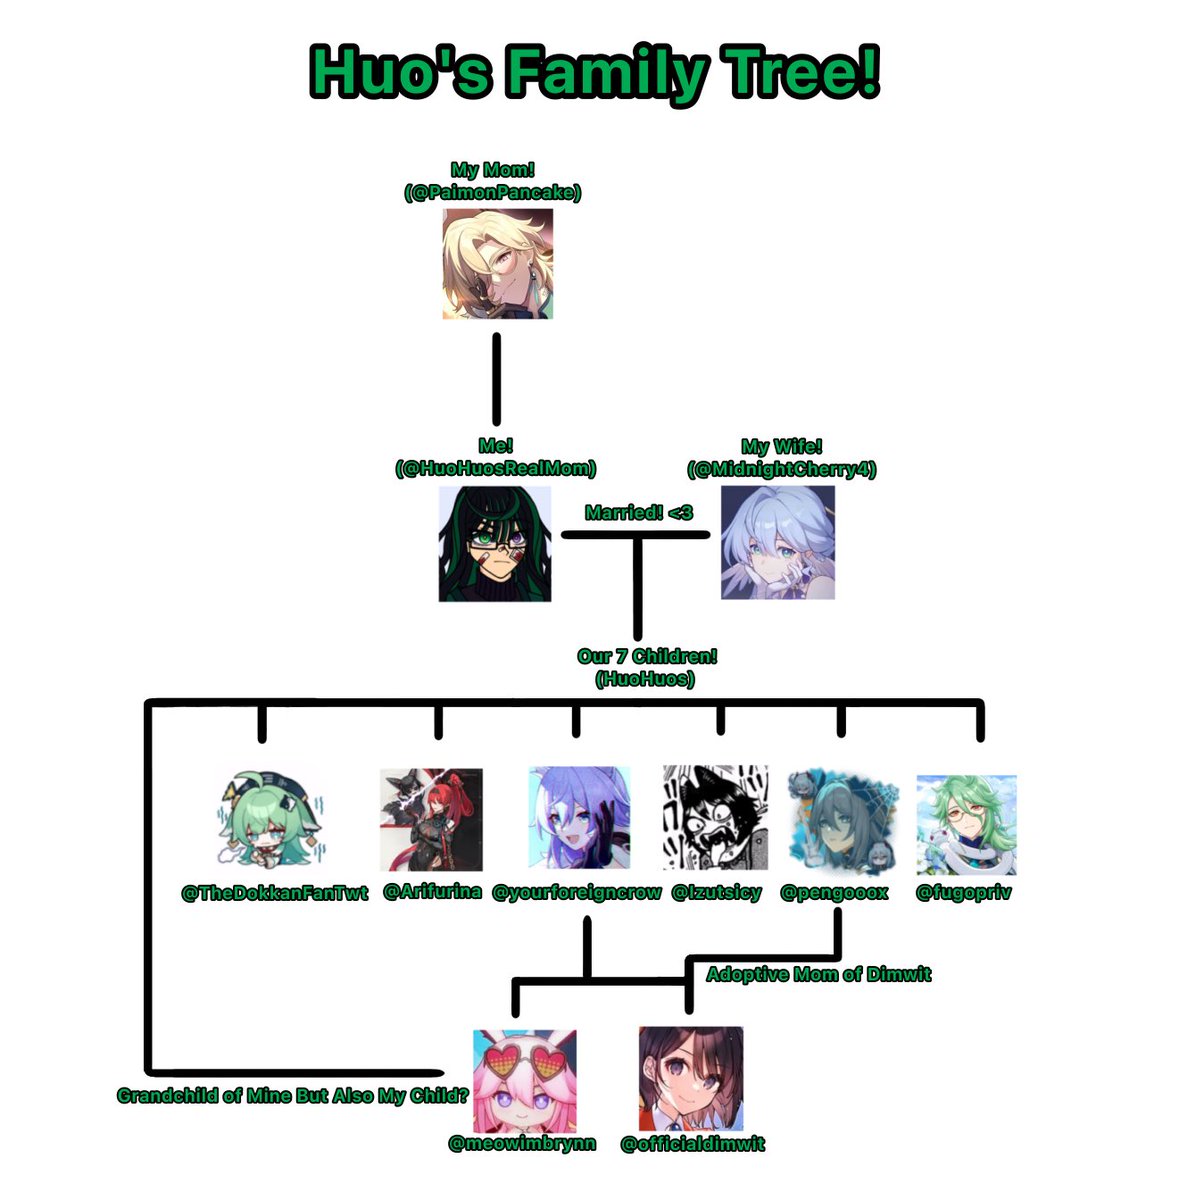 Updated on my family tree that's simplified for now!